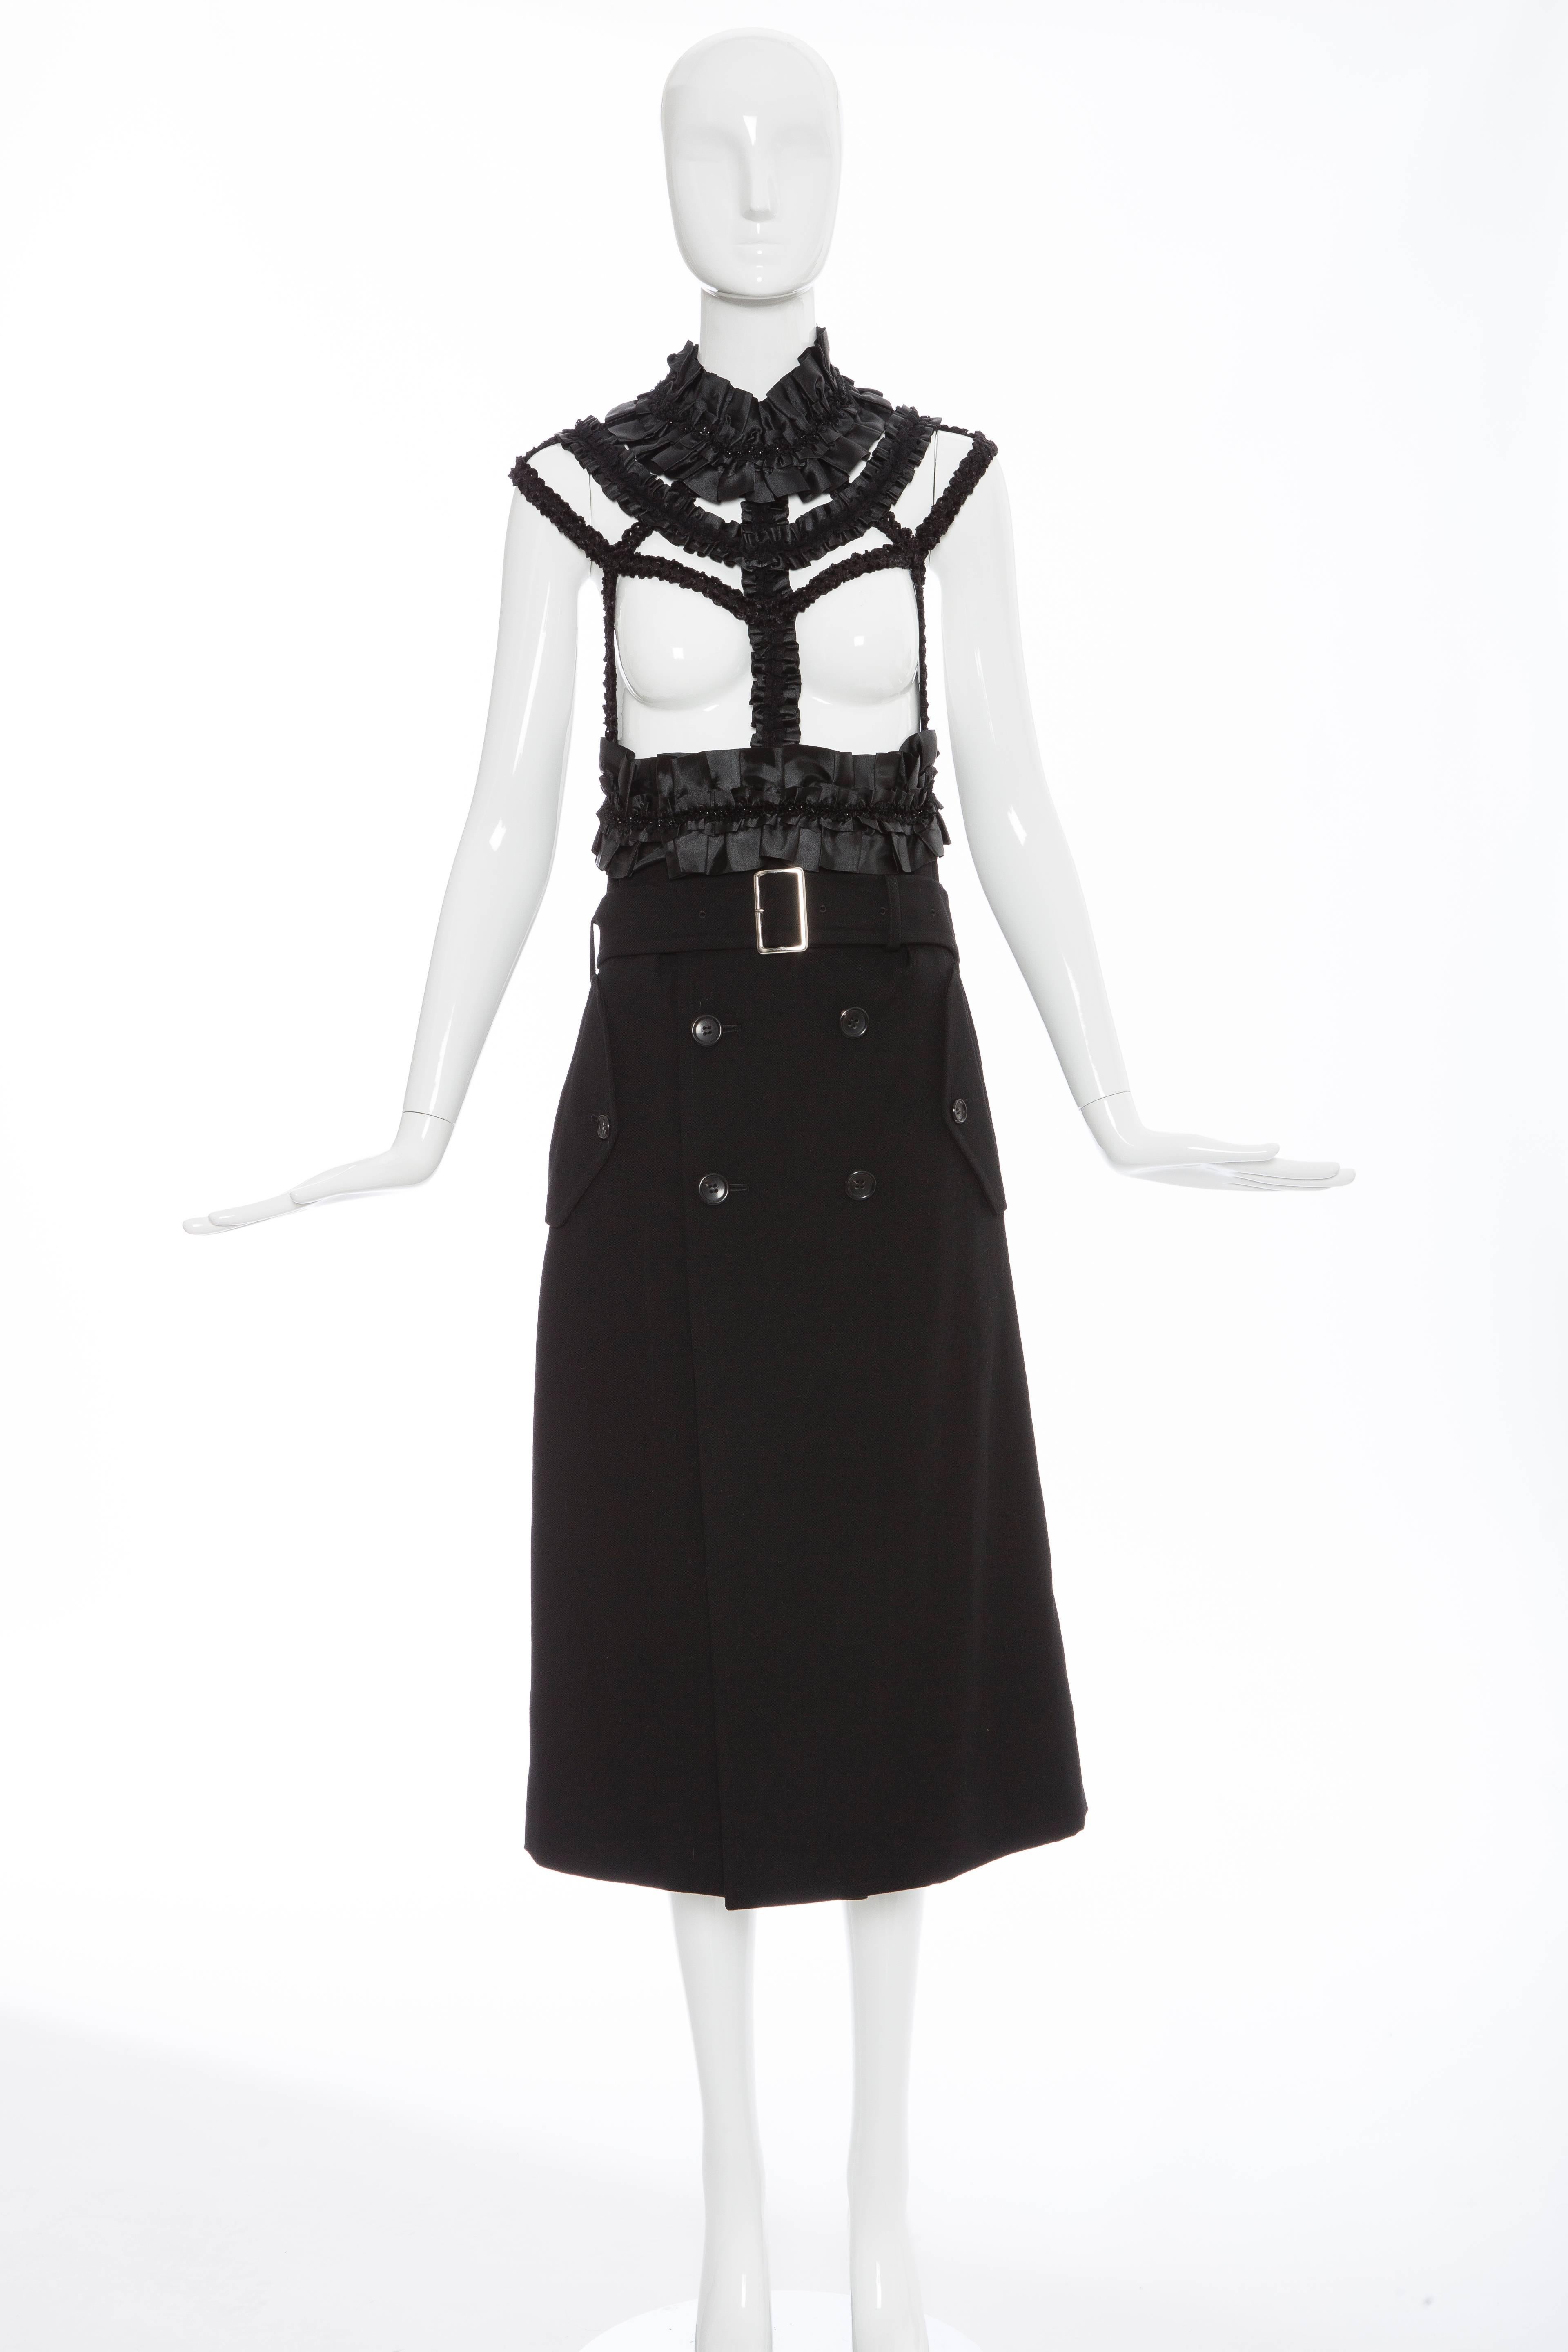  Comme des Garçons, Autumn-Winter 2008 black wool and satin harness dresss featuring black satin ribbon gathered at harness, neck, and waist band and attaches to a faux double breasted mid length skirt. 

Small
 Bust 29